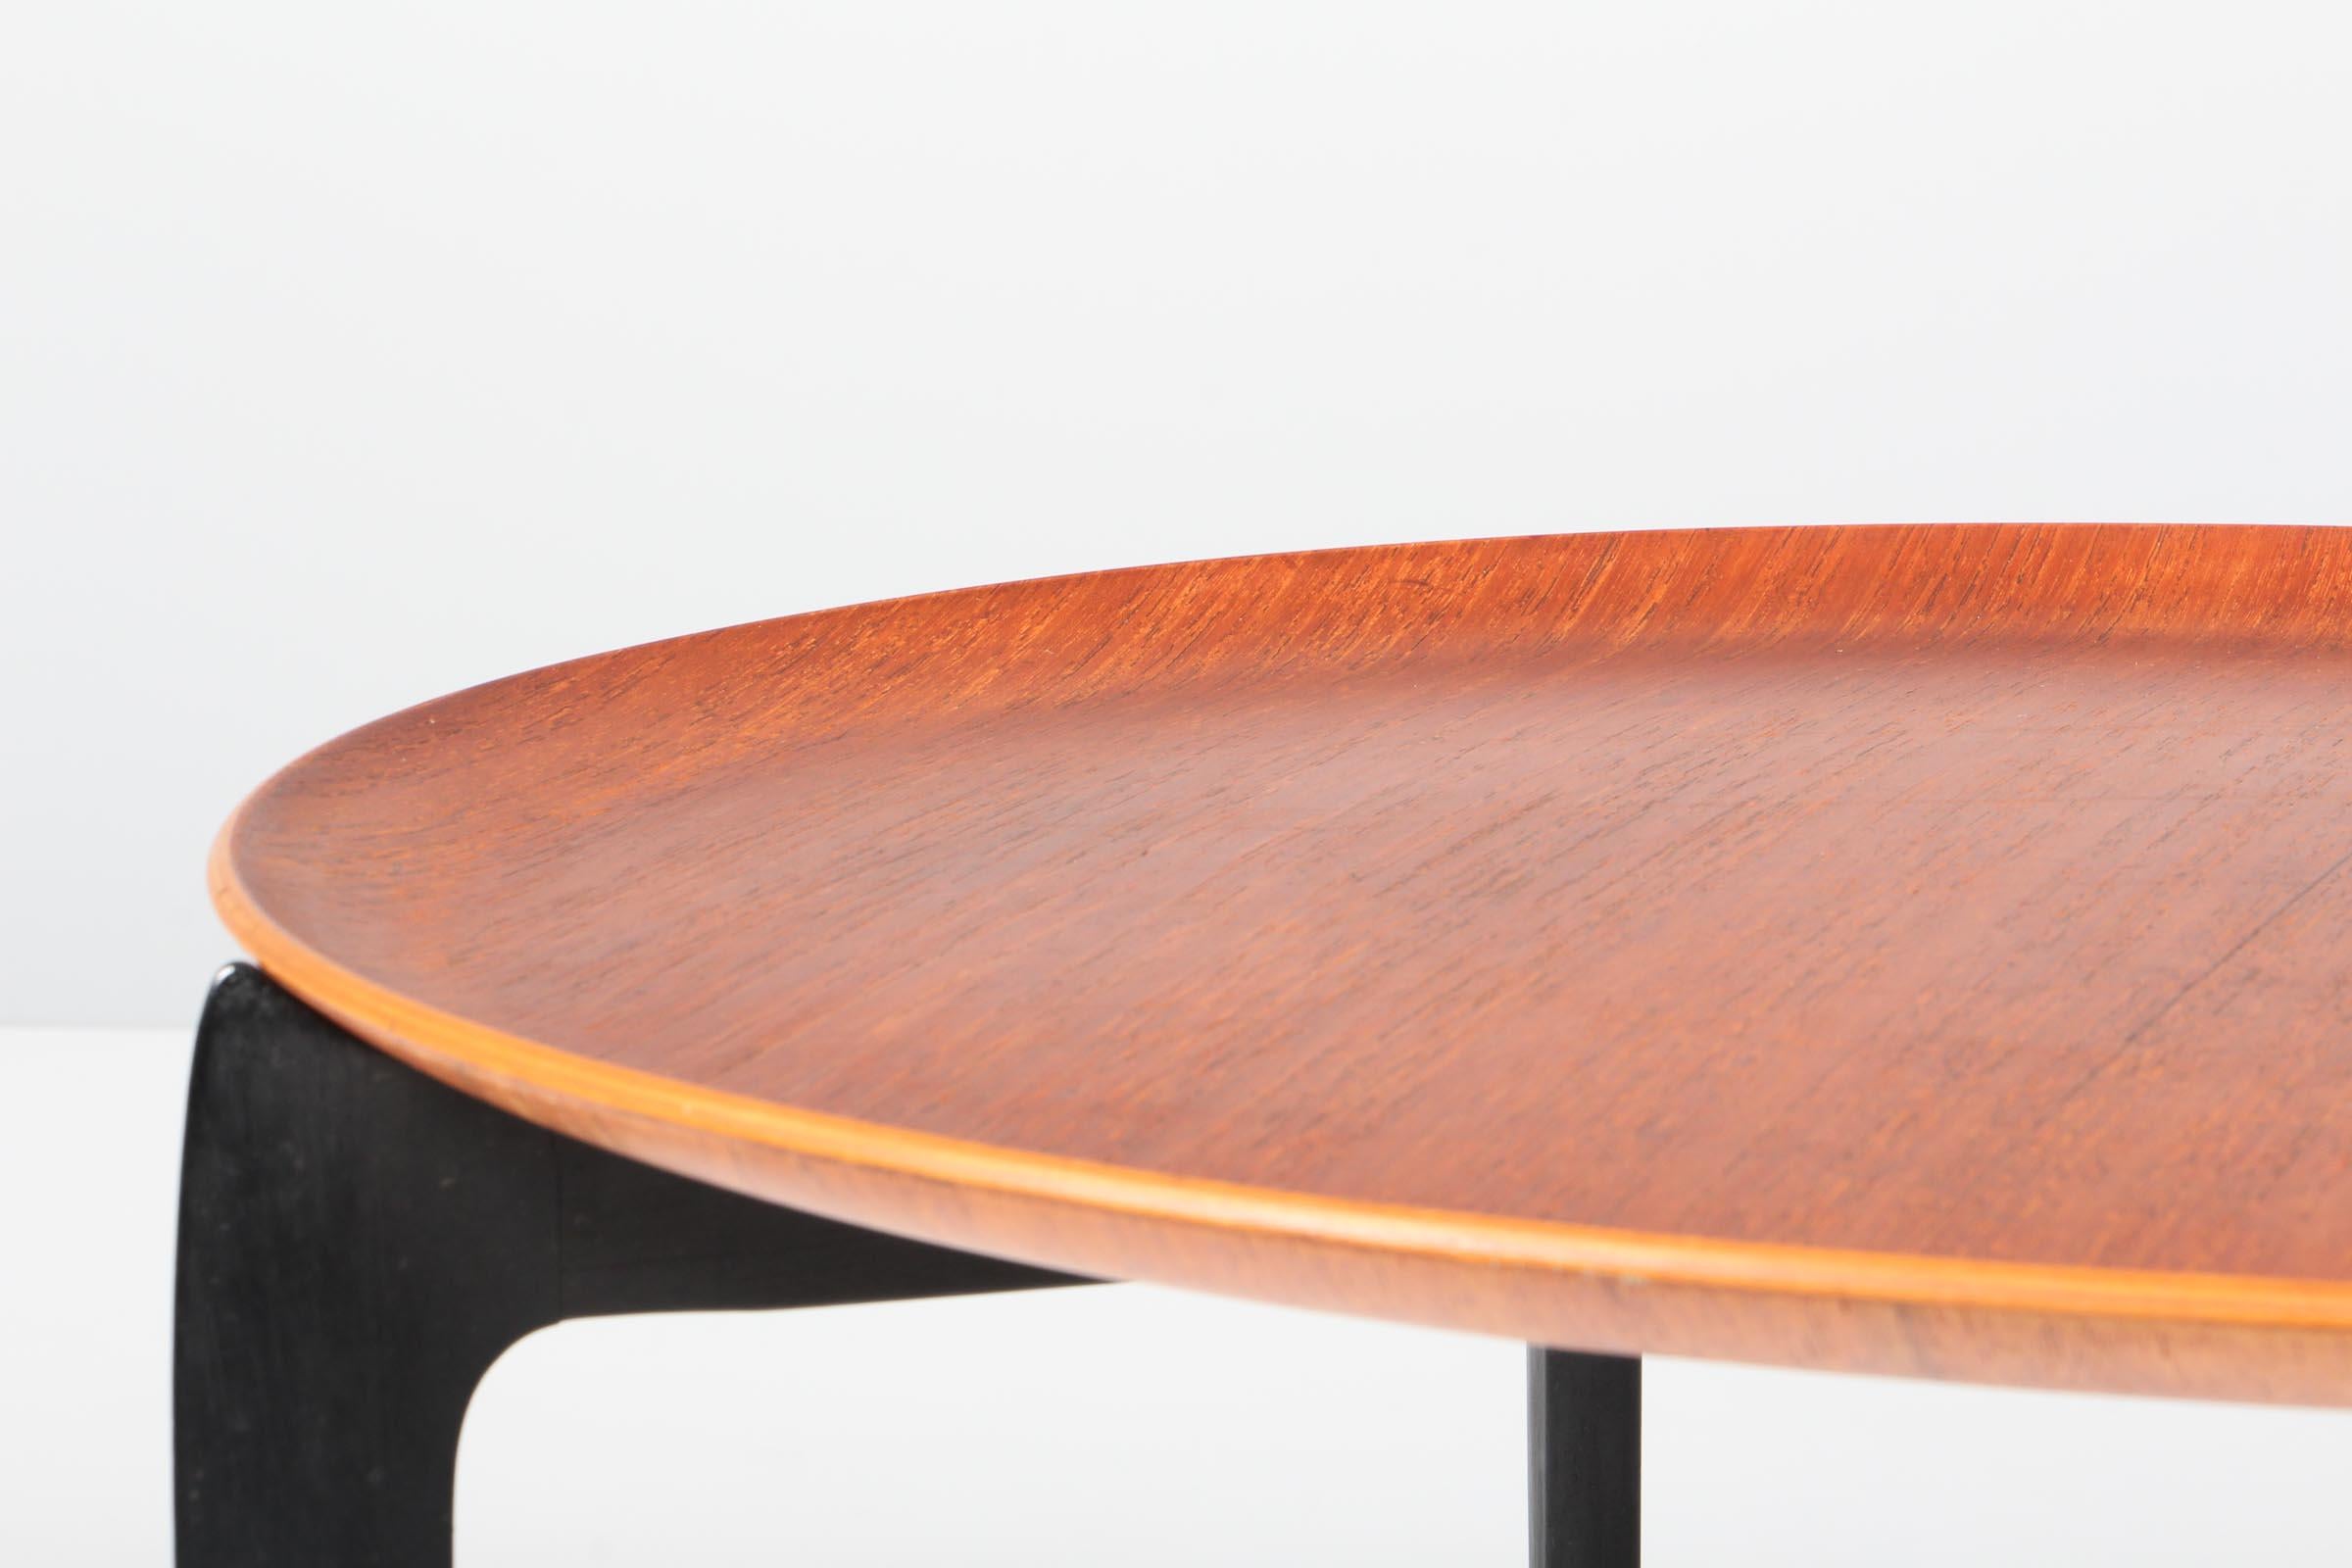 H. Engholm & Svend Åge Willumsen Tray Table of Teak, 1960s In Good Condition For Sale In Esbjerg, DK